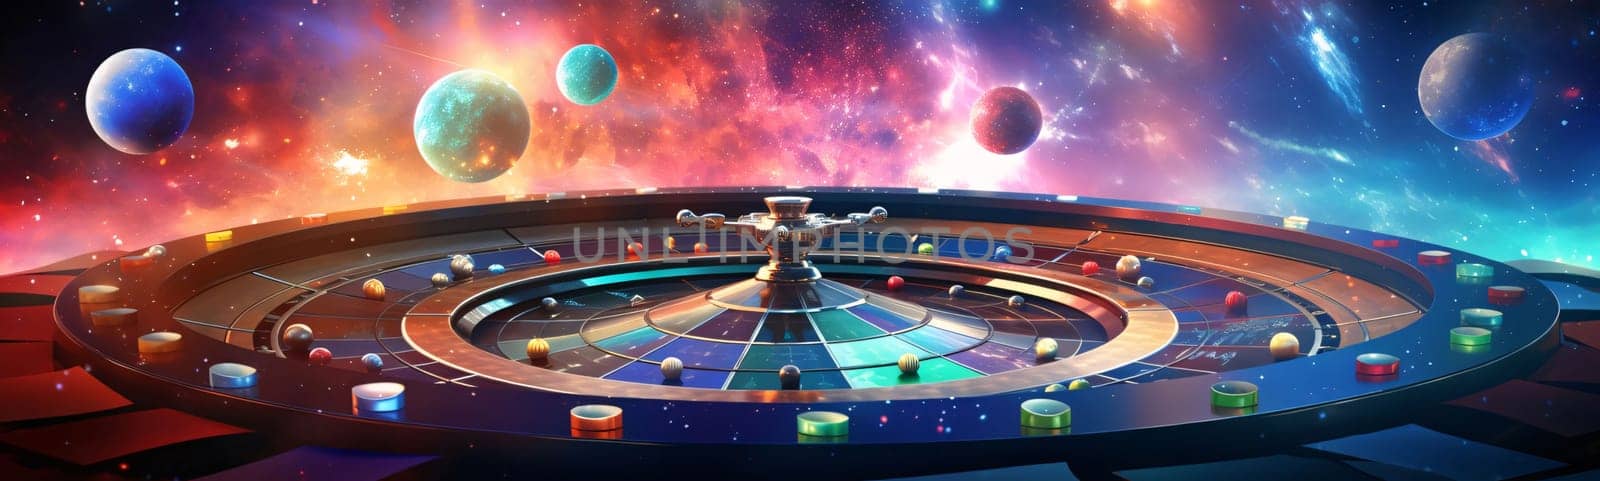 3D illustration of a spinning roulette with planets in the background by ThemesS